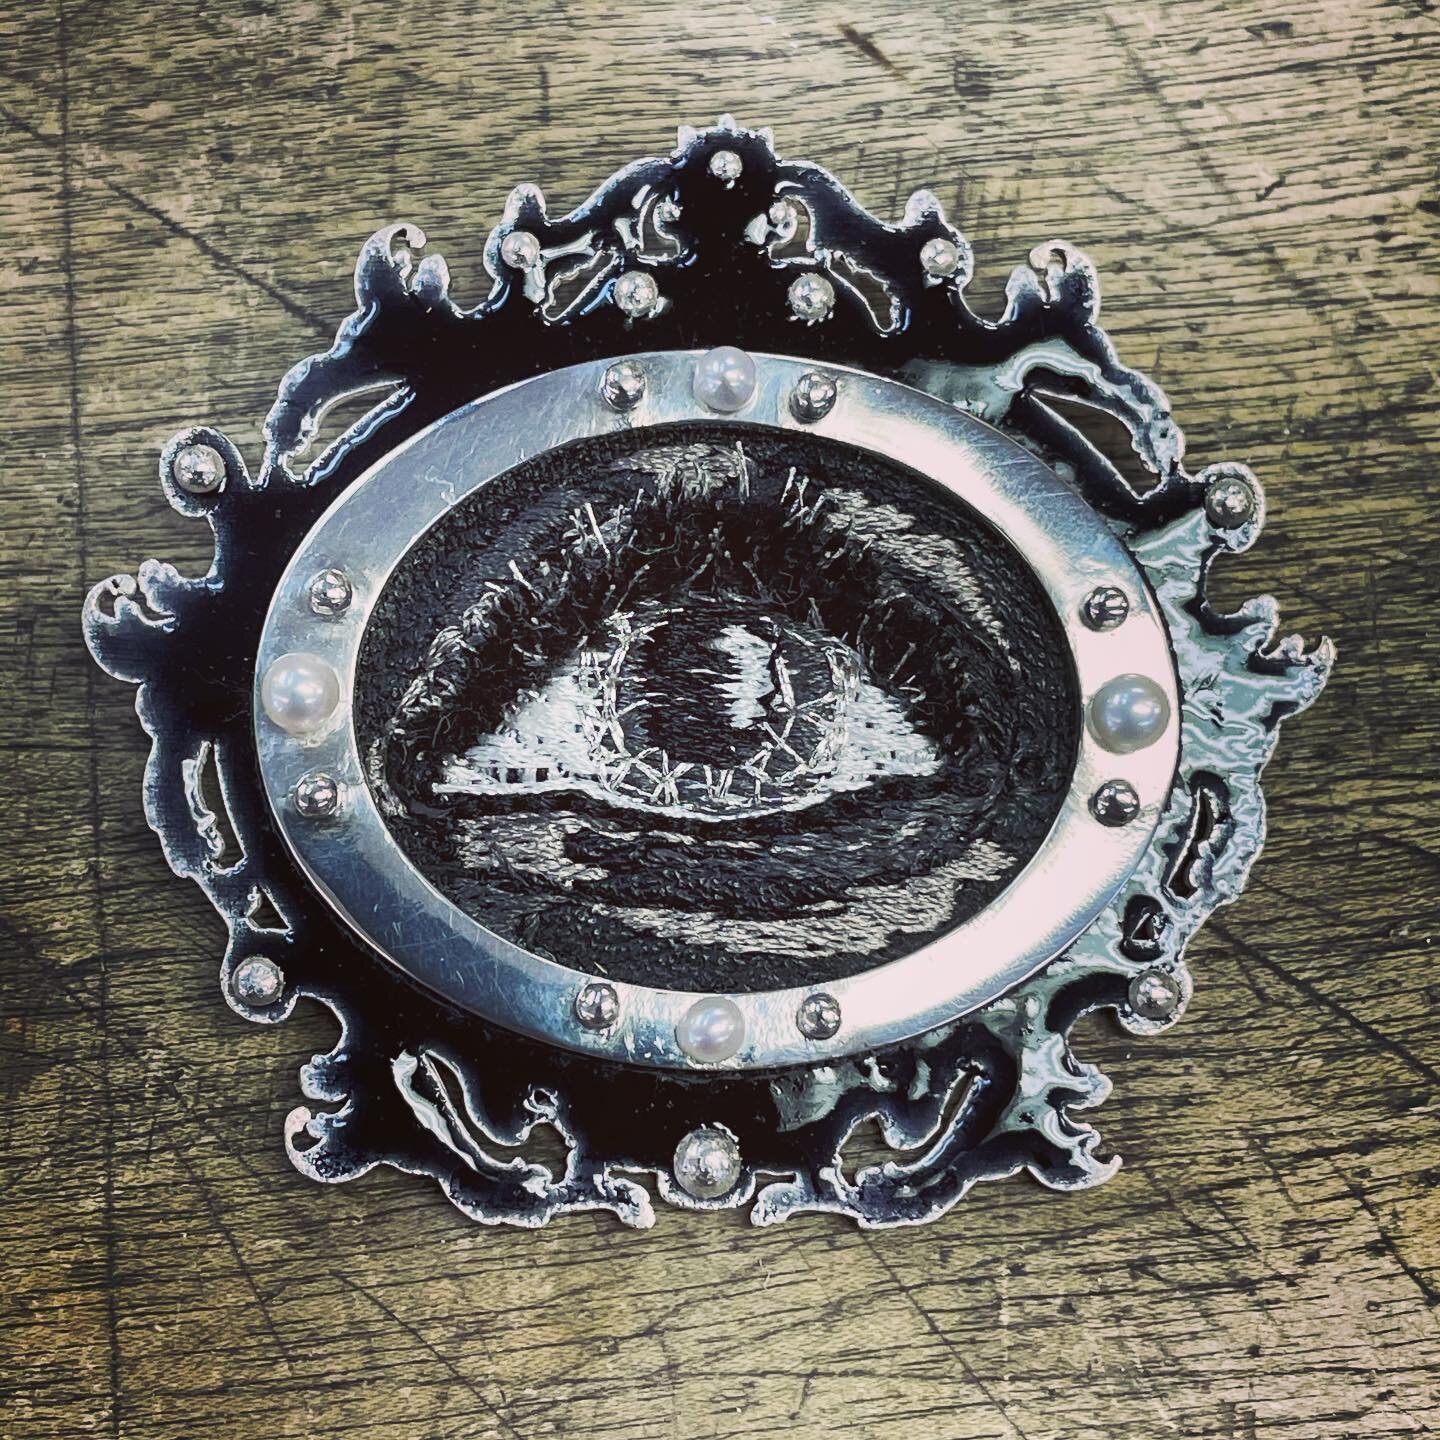 Norsola x Vanessa - Lover&rsquo;s Eye
First prototype of a new series.
Embroidered eye created by the inimitable @vanessayanow 

Fine and sterling silver, textile, enamel, pearl.

#handmadejewelry #loverseye #metalsmith #jewellery #artjewelery #etsym